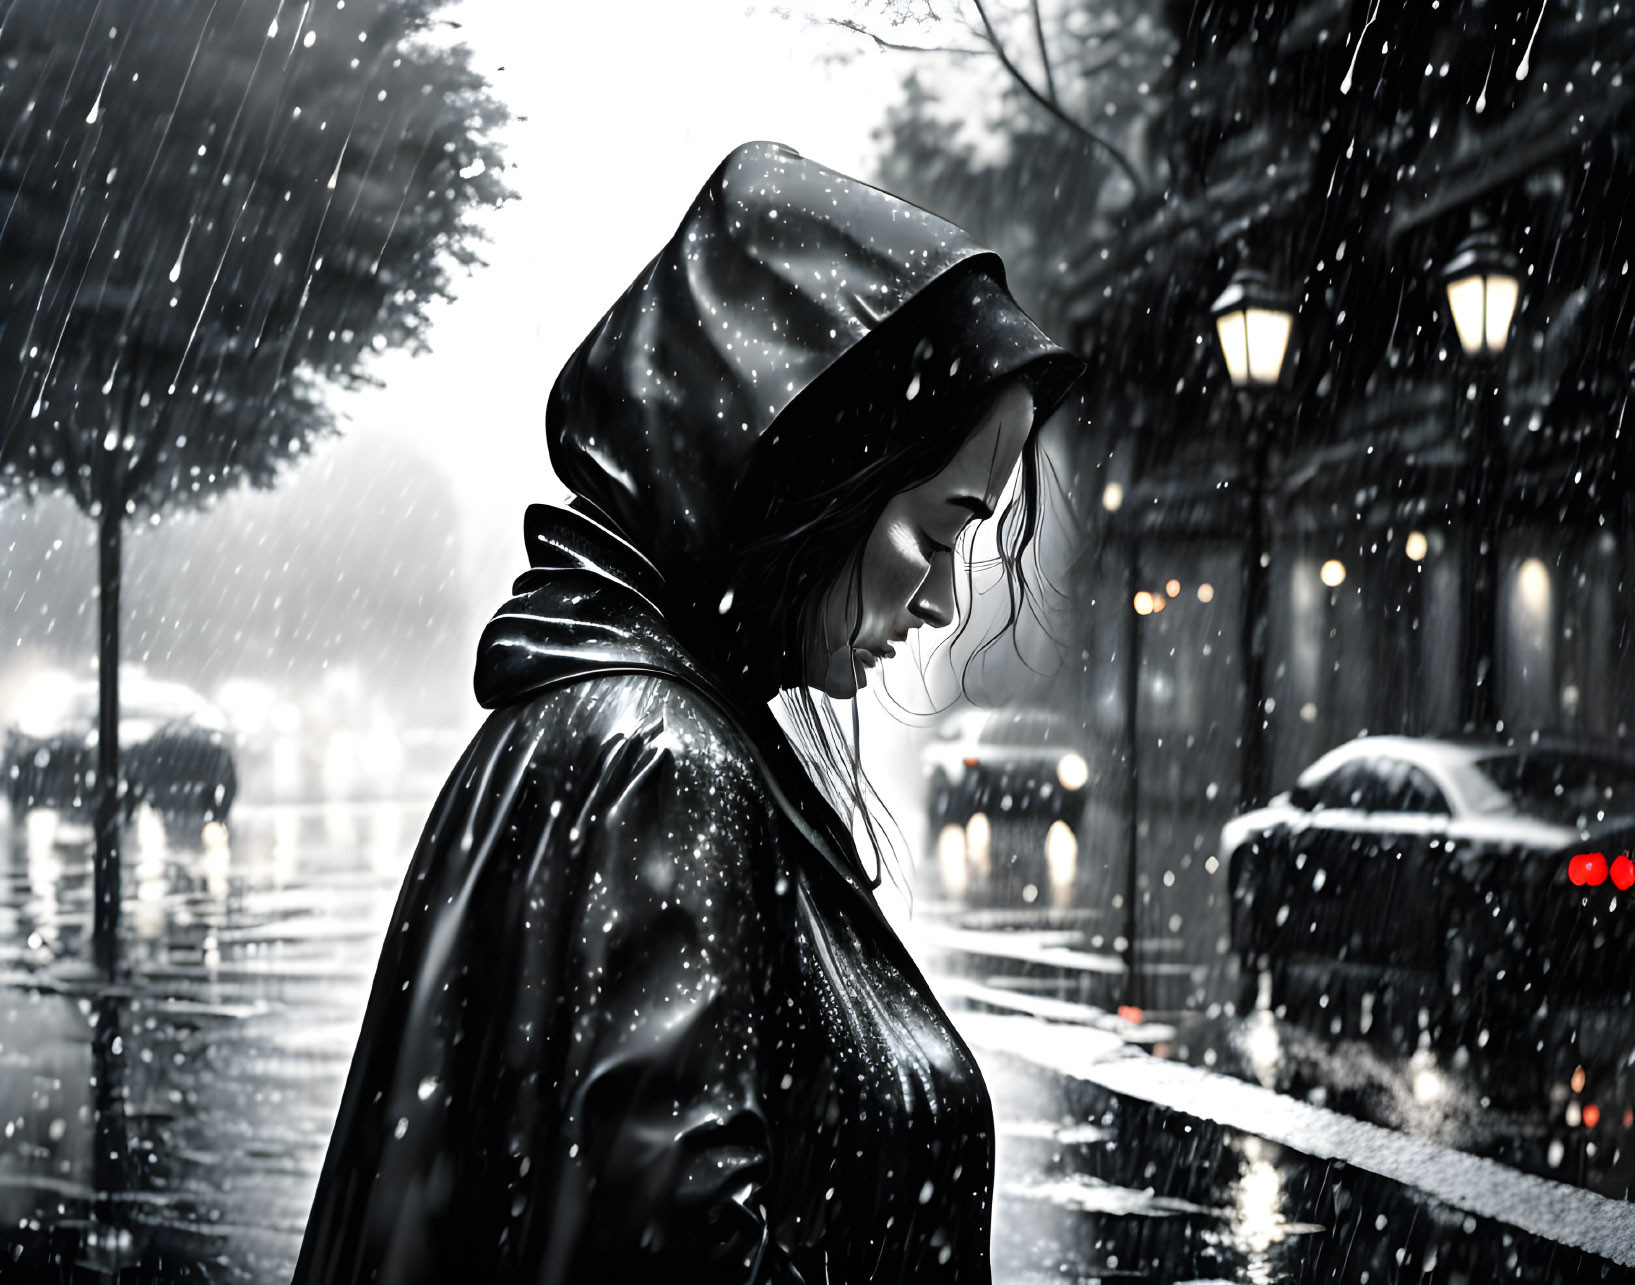 Woman in hooded coat standing in rain at night with city lights and cars